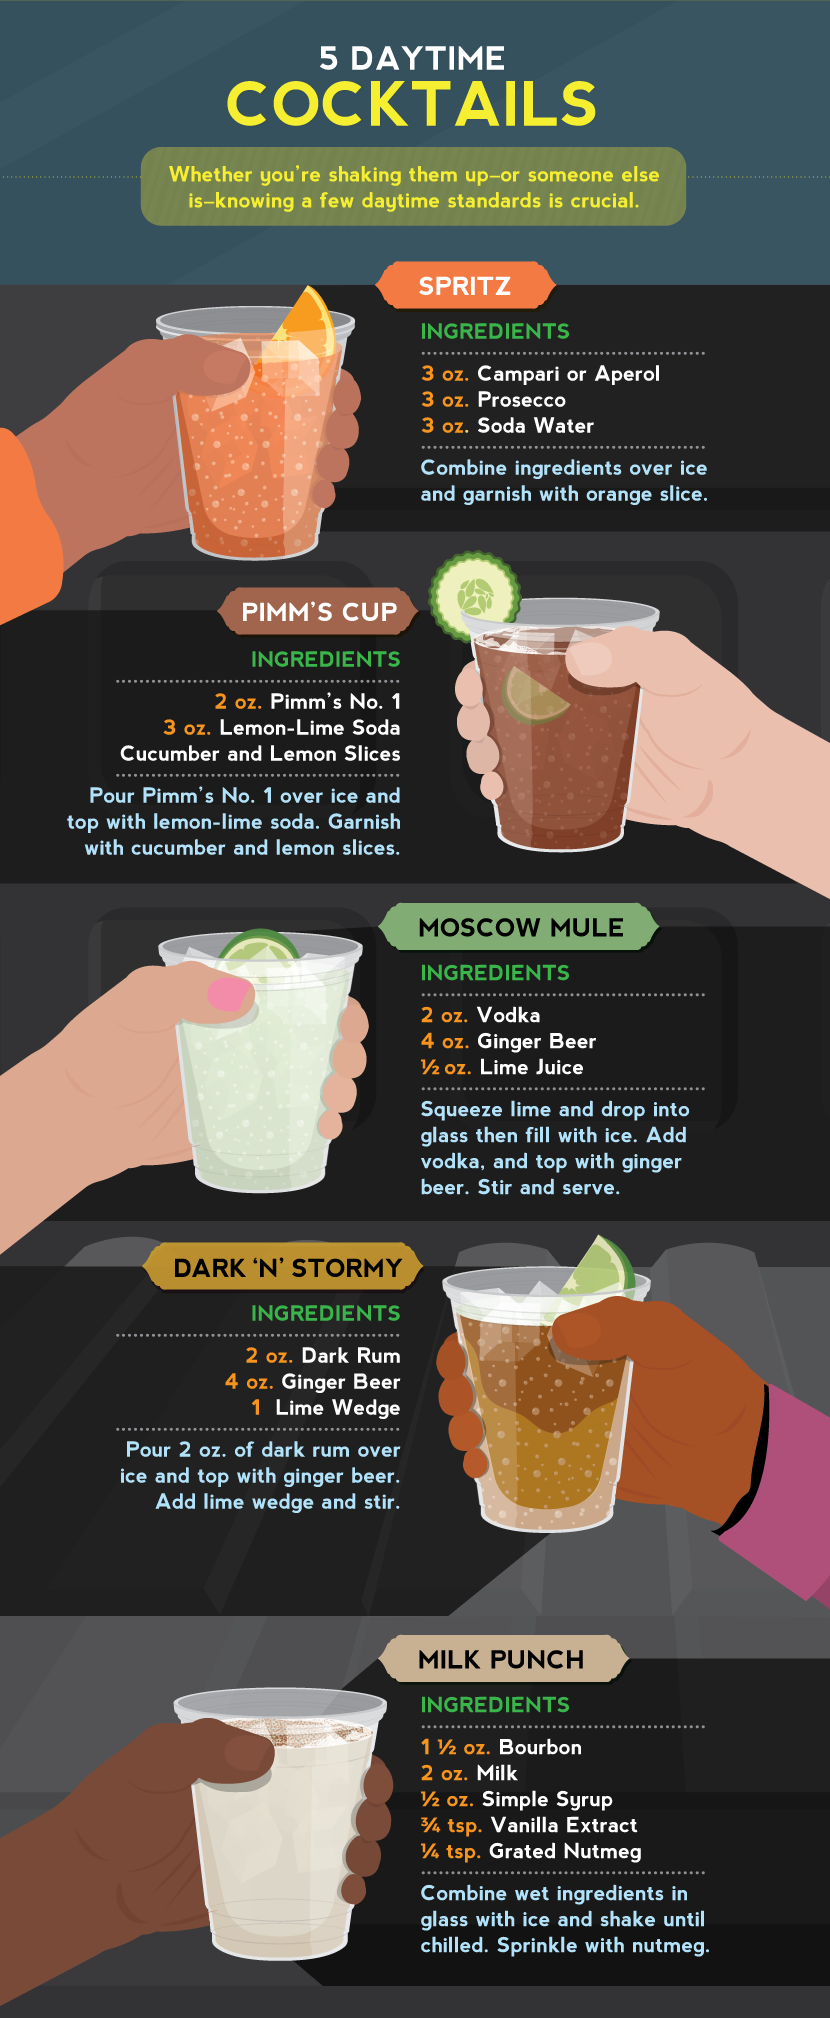 Five Daytime Cocktails - How to Make Cocktails for a Tailgate